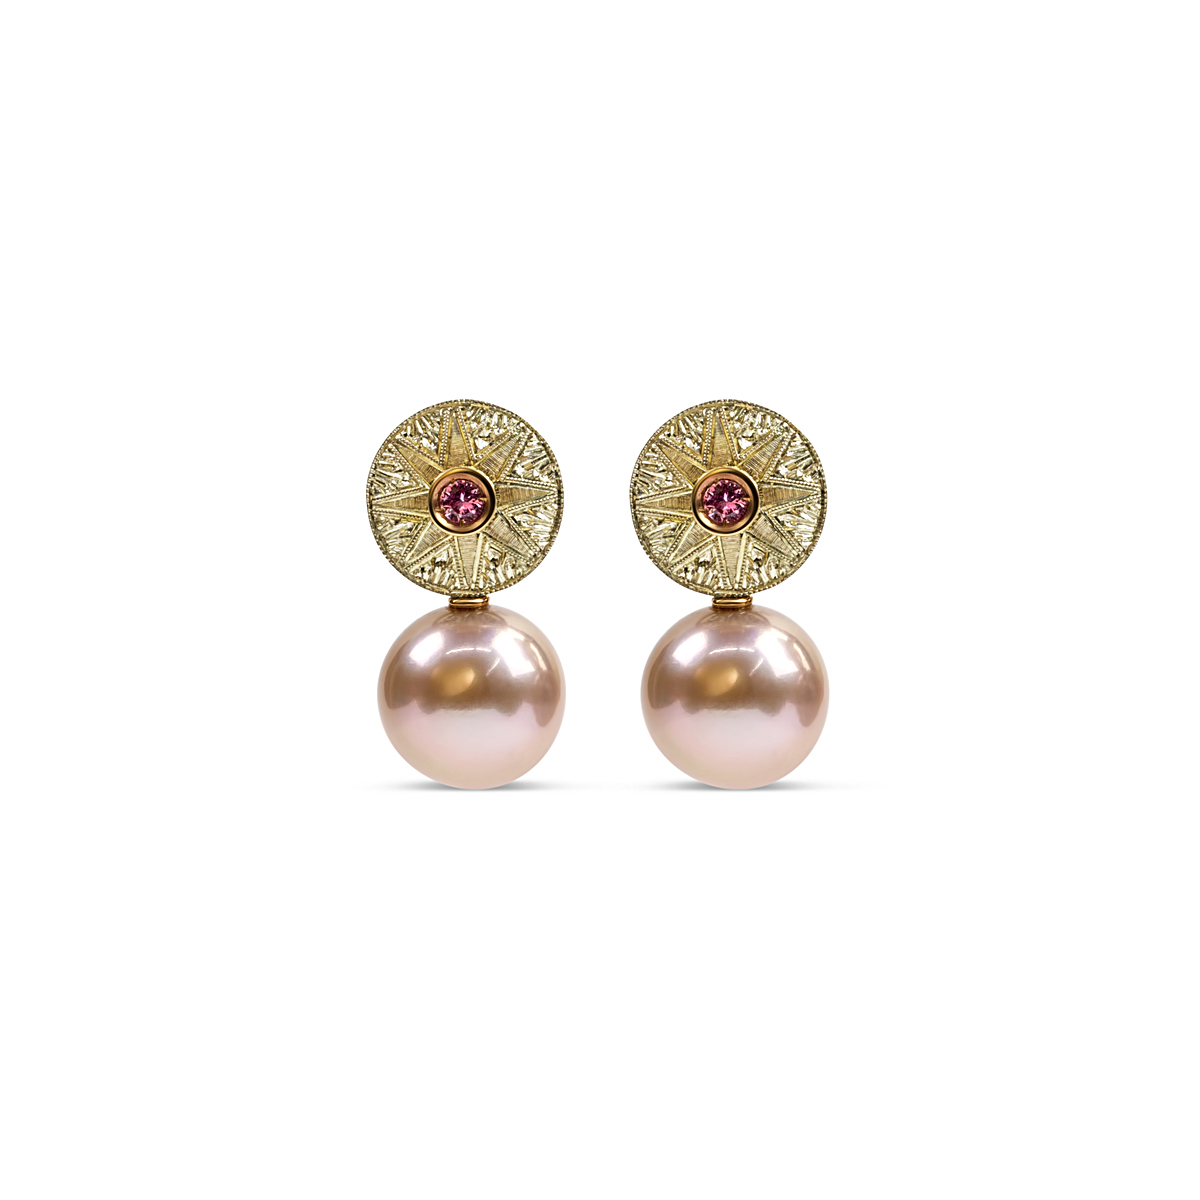 Pink Freshwater Pearl Earrings - Engraved 18K Gold and Silver 